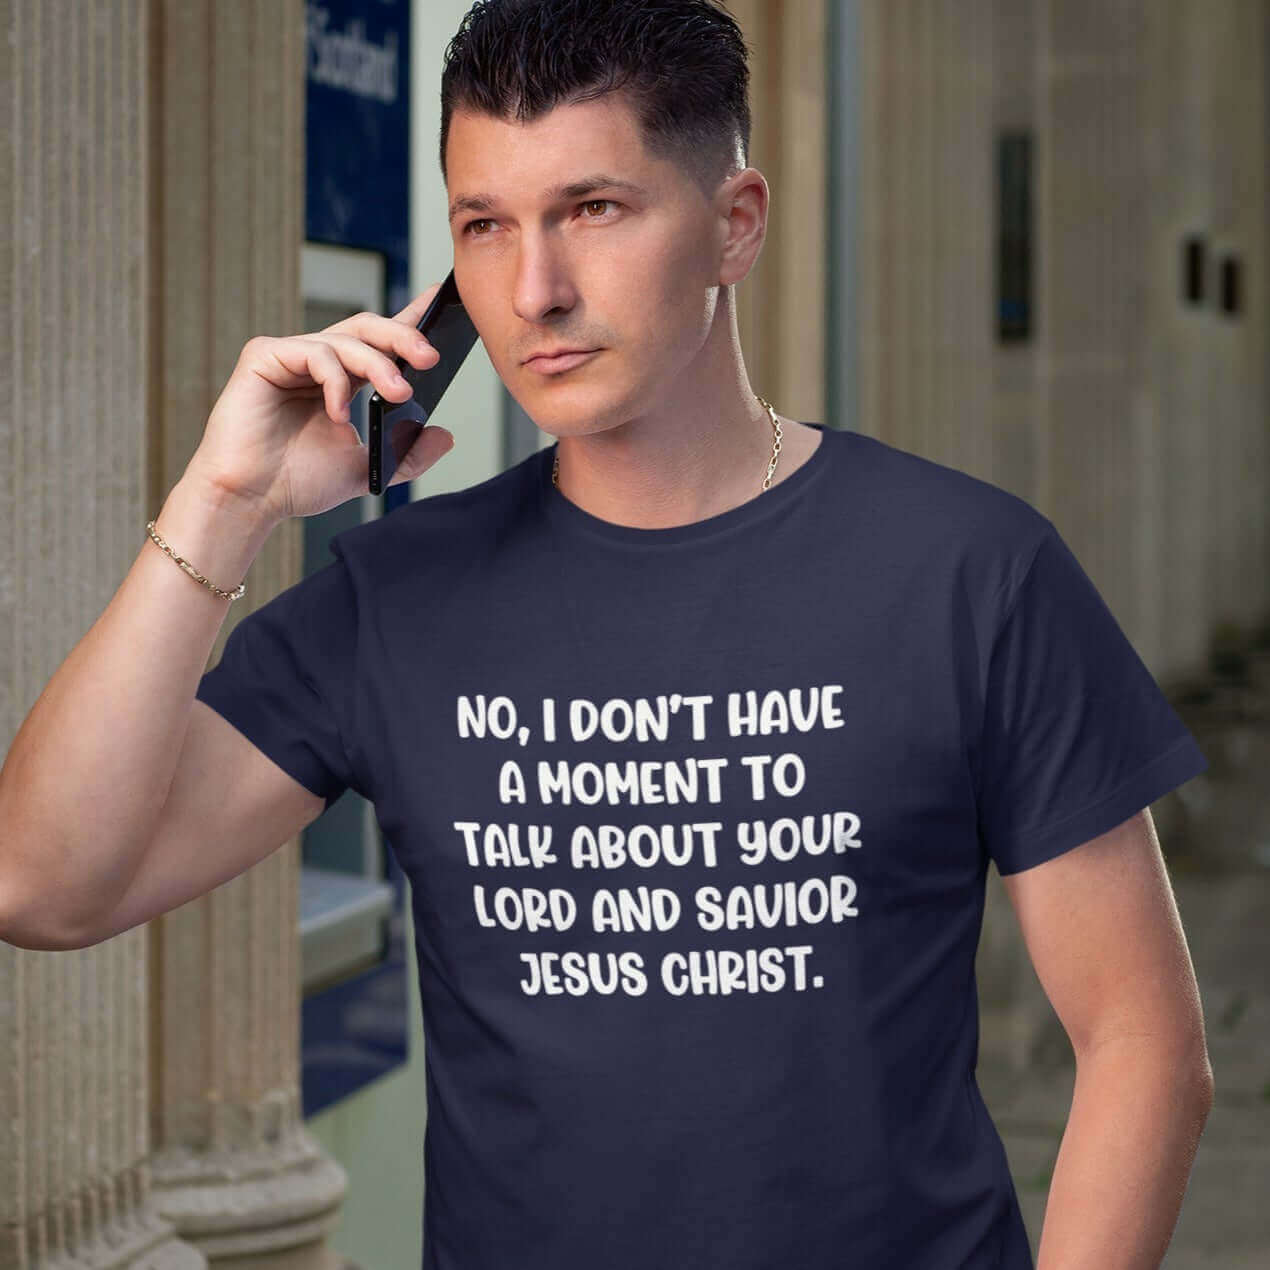 Man on a cell phone wearing a navy blue t-shirt with the phrase No, I don't have a moment to talk about your lord and savior Jesus Christ printed on the front.